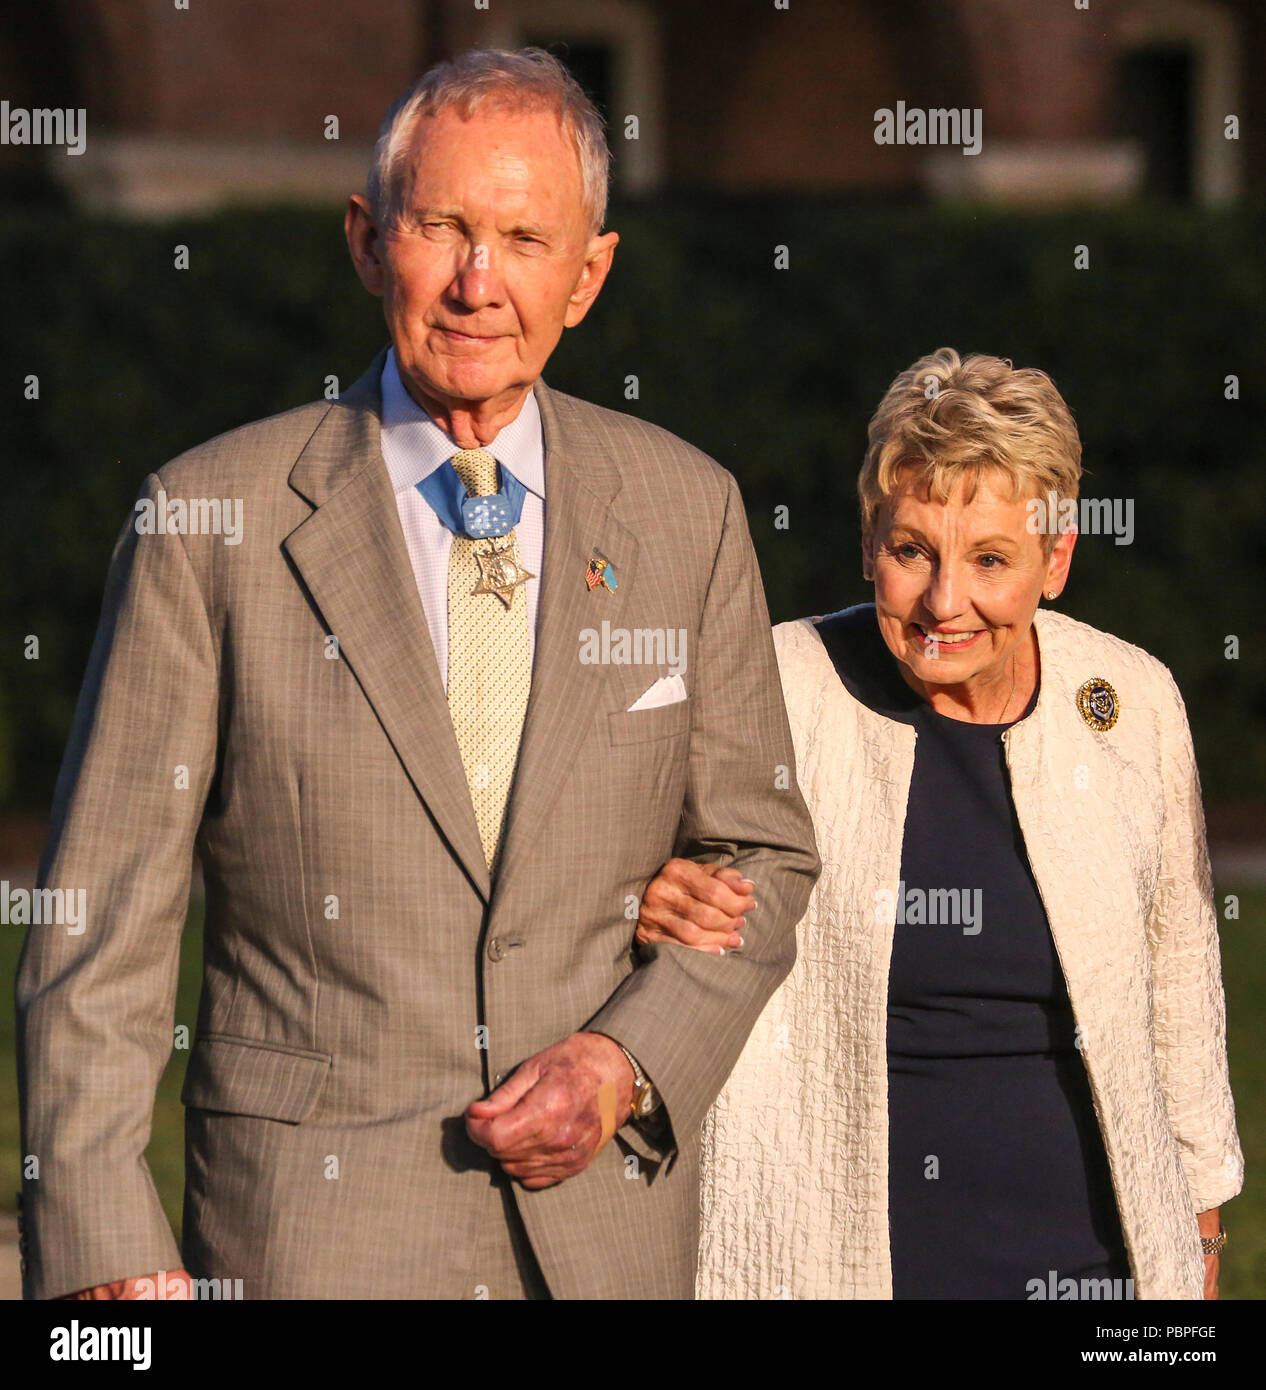 Major Gen. James E. Livingston, Medal of Honor recipient, and his wife, Sara Livingston, walk down Center Walk, during a Friday Evening Parade at Marine Barracks Washington D.C., July 20, 2018. Livingston was the guest of honor for the parade and the hosting official was Lt. Gen. Brian D. Beaudreault, deputy commandant, Plans, Policies and Operations. (Official Marine Corps photo by Cpl. Damon Mclean/Released) Stock Photo